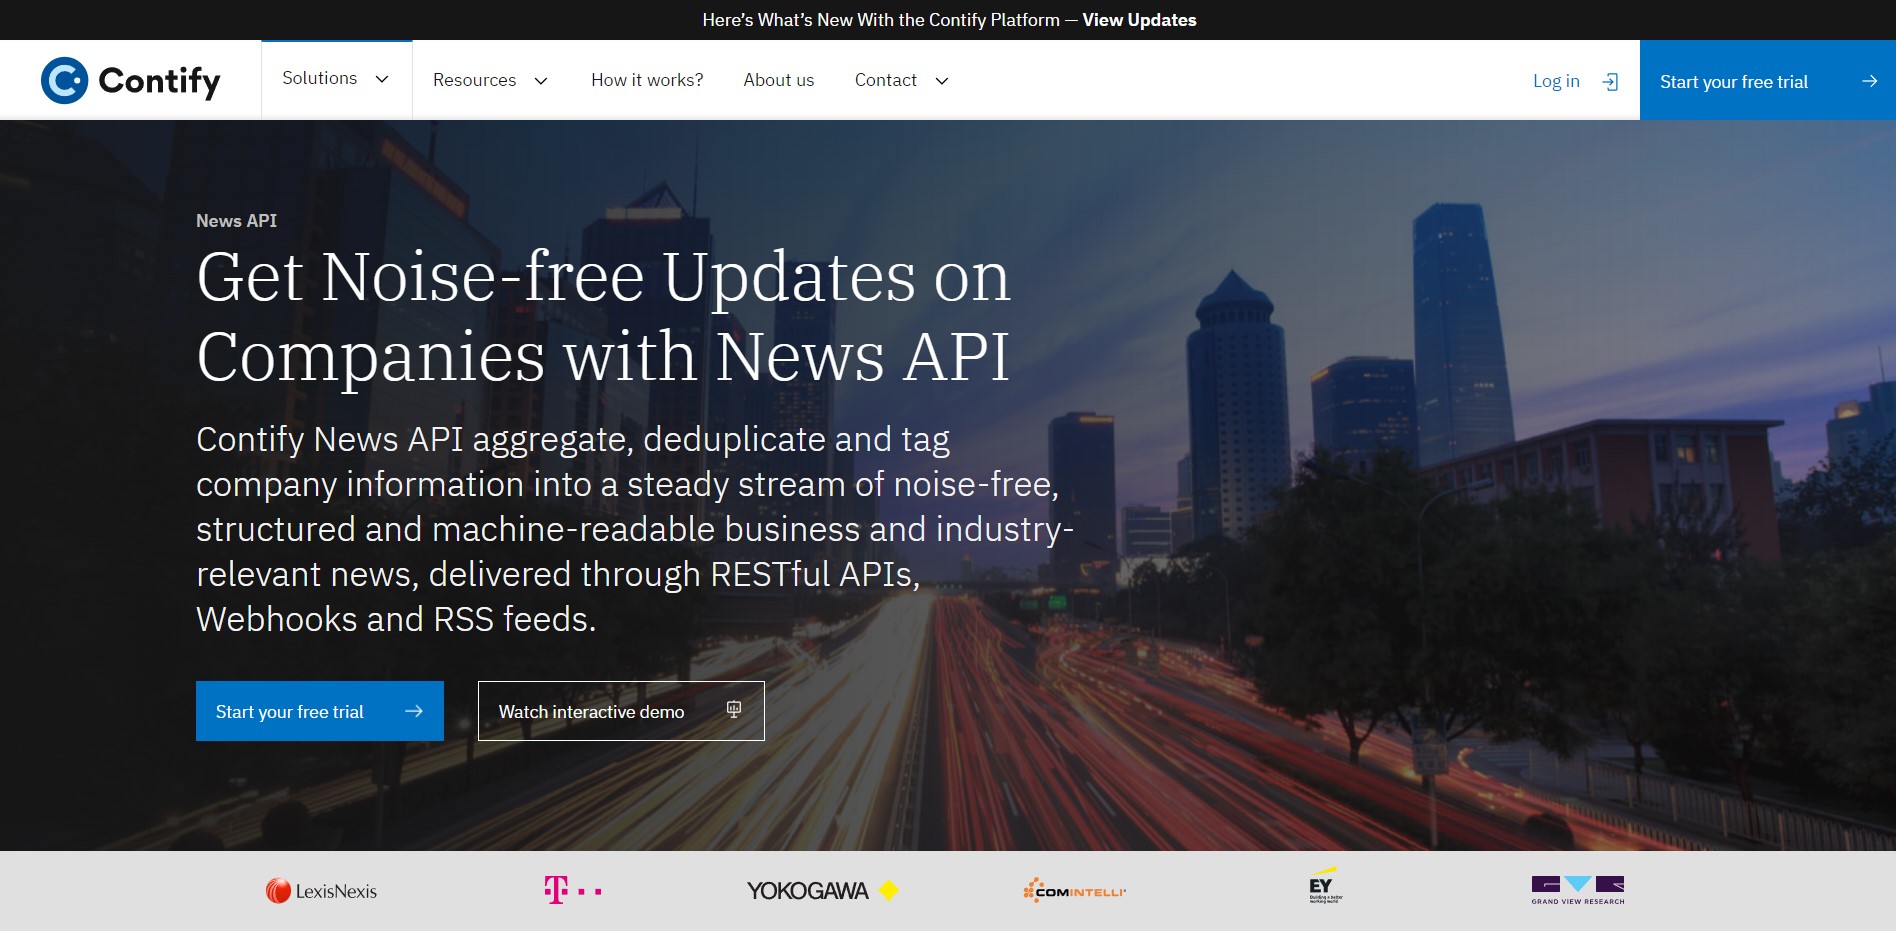 News API by Contify Landing page